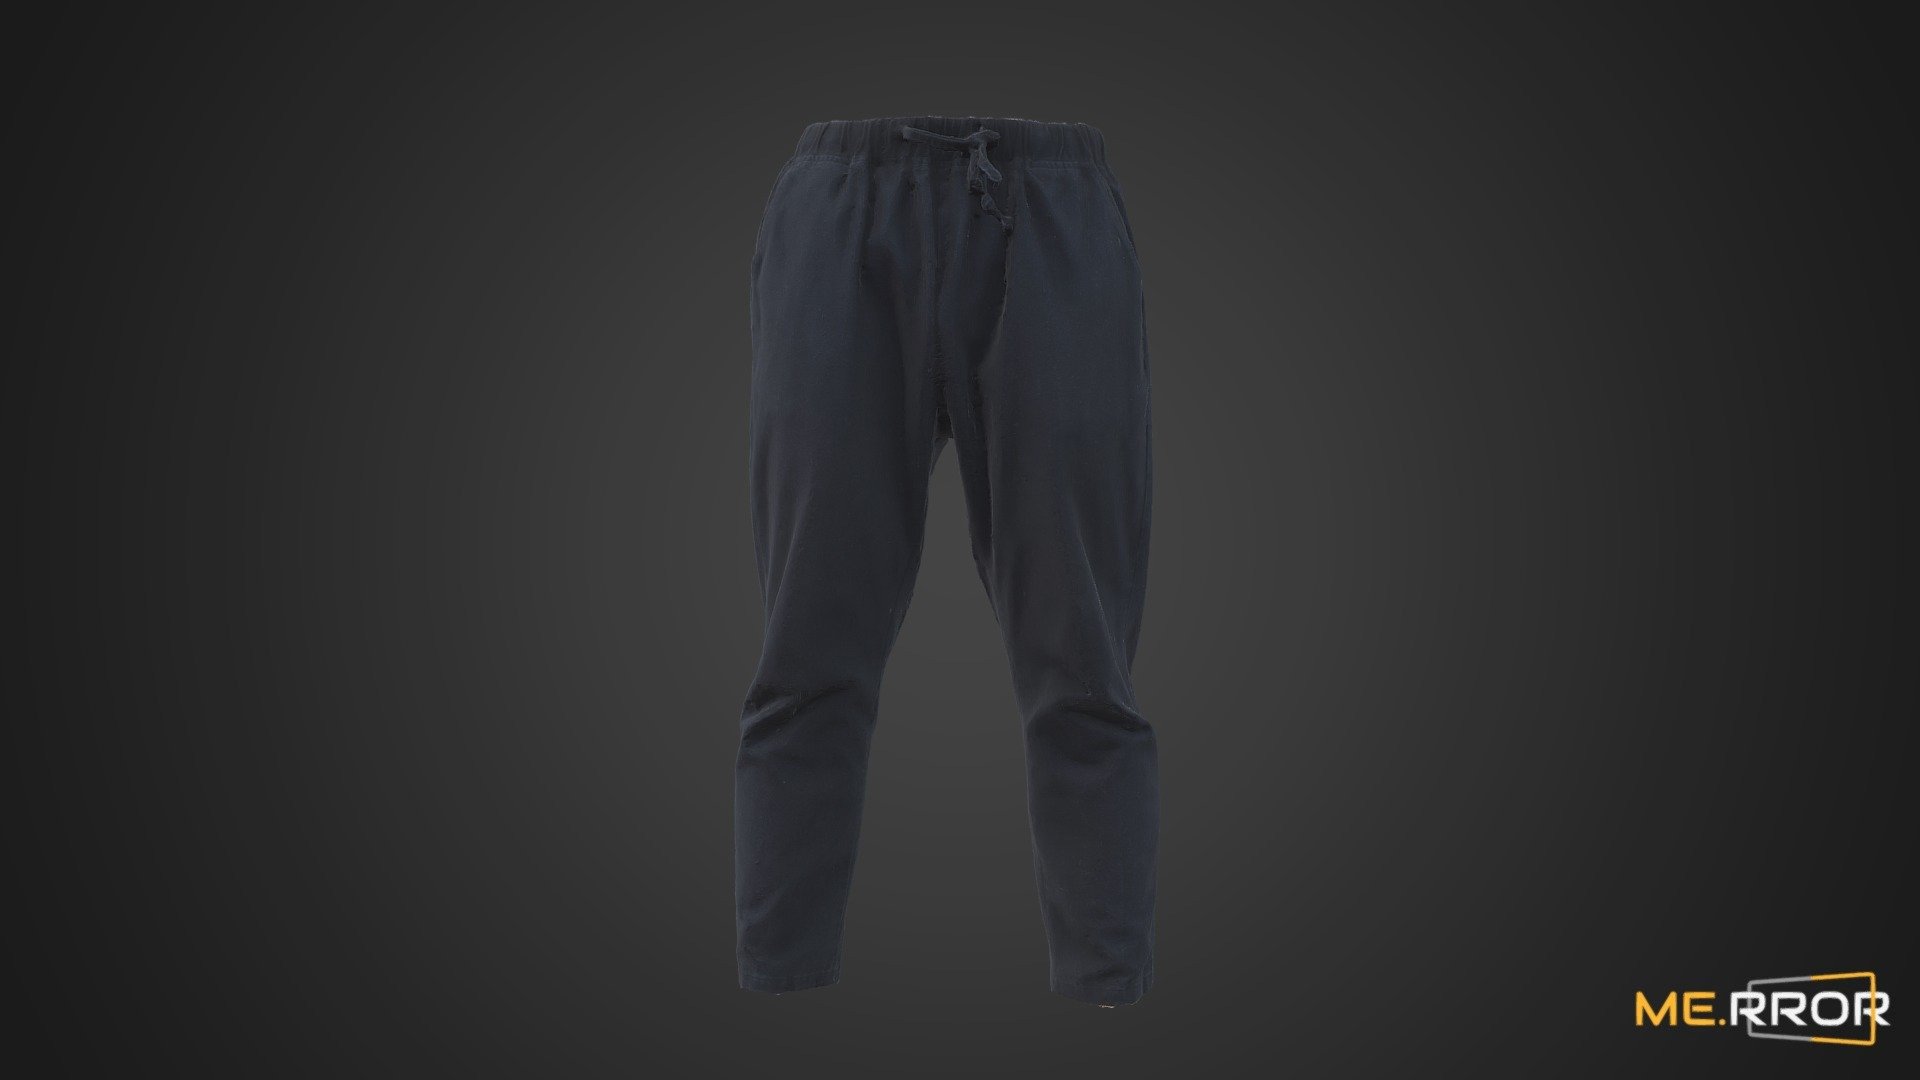 MERROR is a 3D Content PLATFORM which introduces various Asian assets to the 3D world


3DScanning #Photogrametry #ME.RROR - Black Training Pants - Buy Royalty Free 3D model by ME.RROR (@merror) 3d model